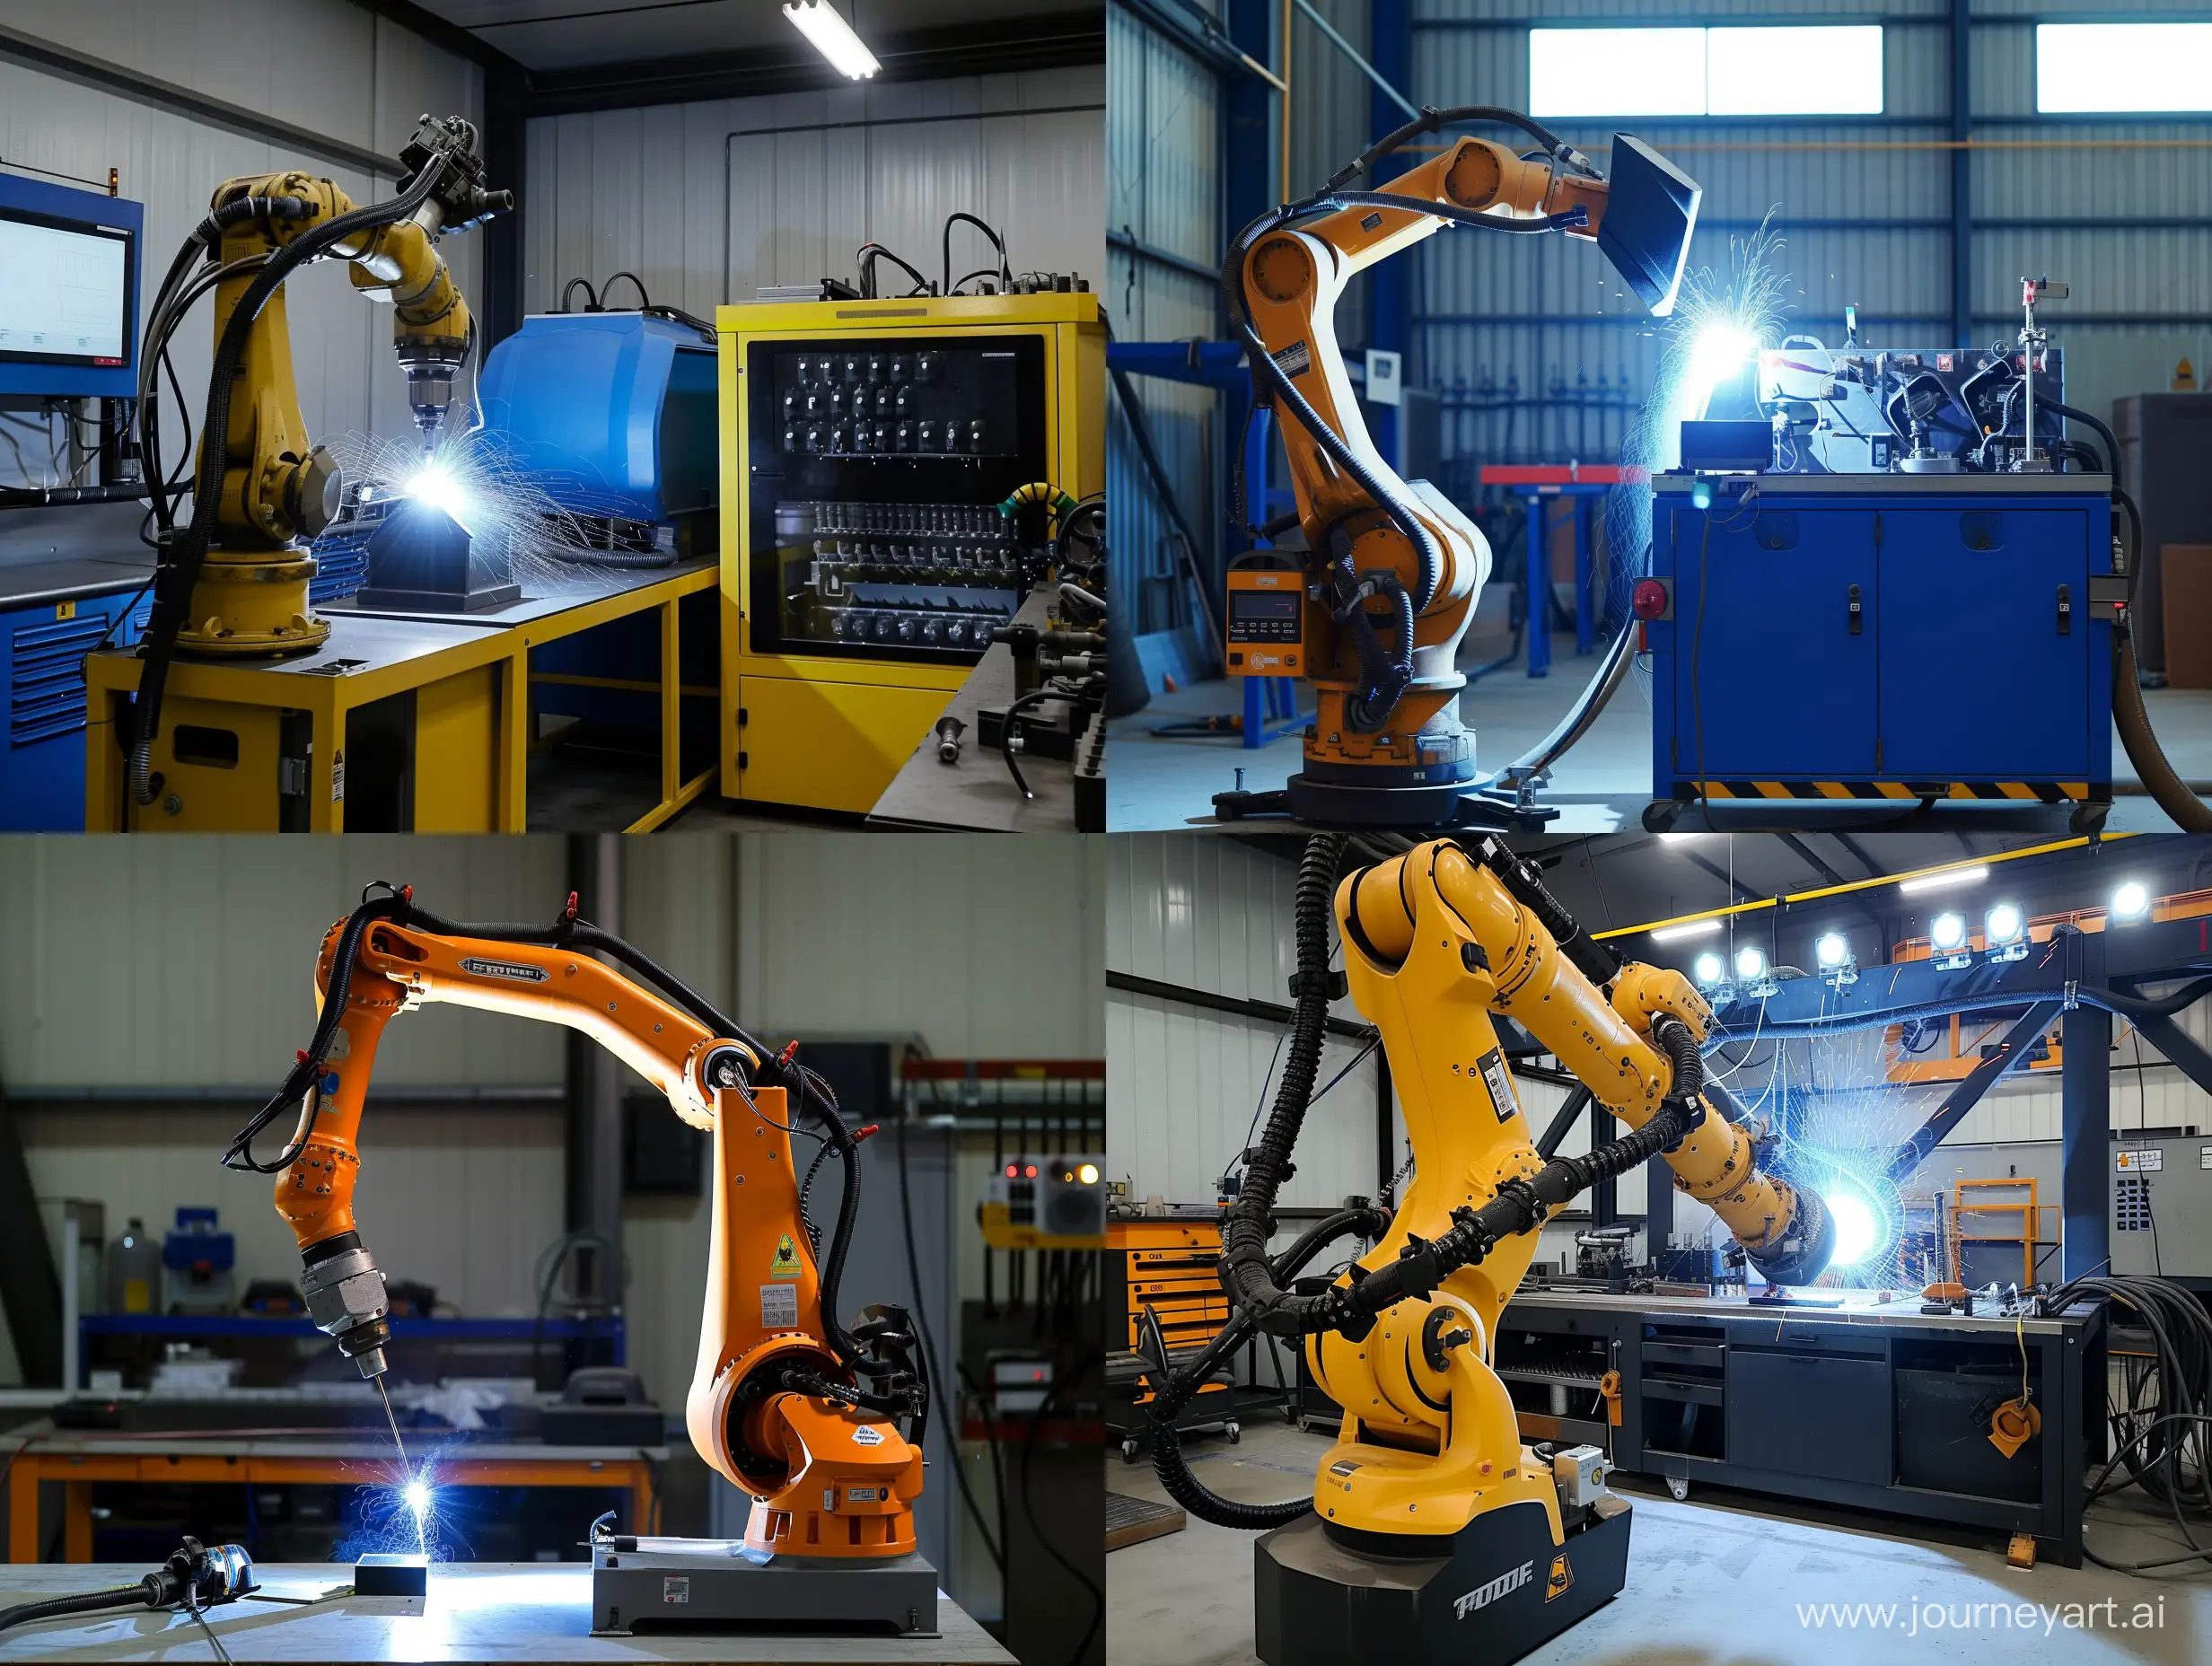 Advanced-Welding-Robot-Workstation-with-Sandblasting-Gun-Cleaner-Product-Introduction